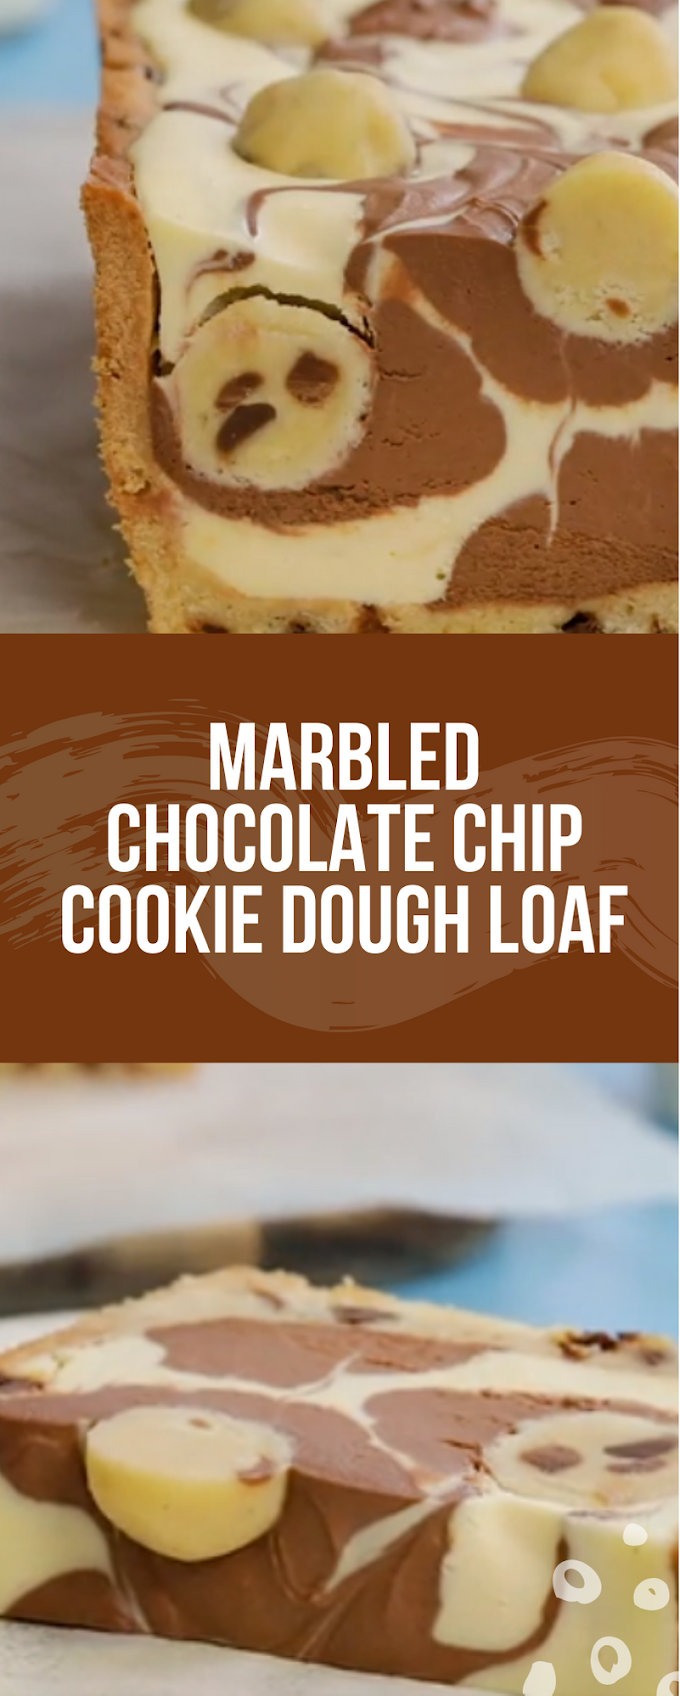 Marbled Chocolate Chip Cookie Dough Loaf